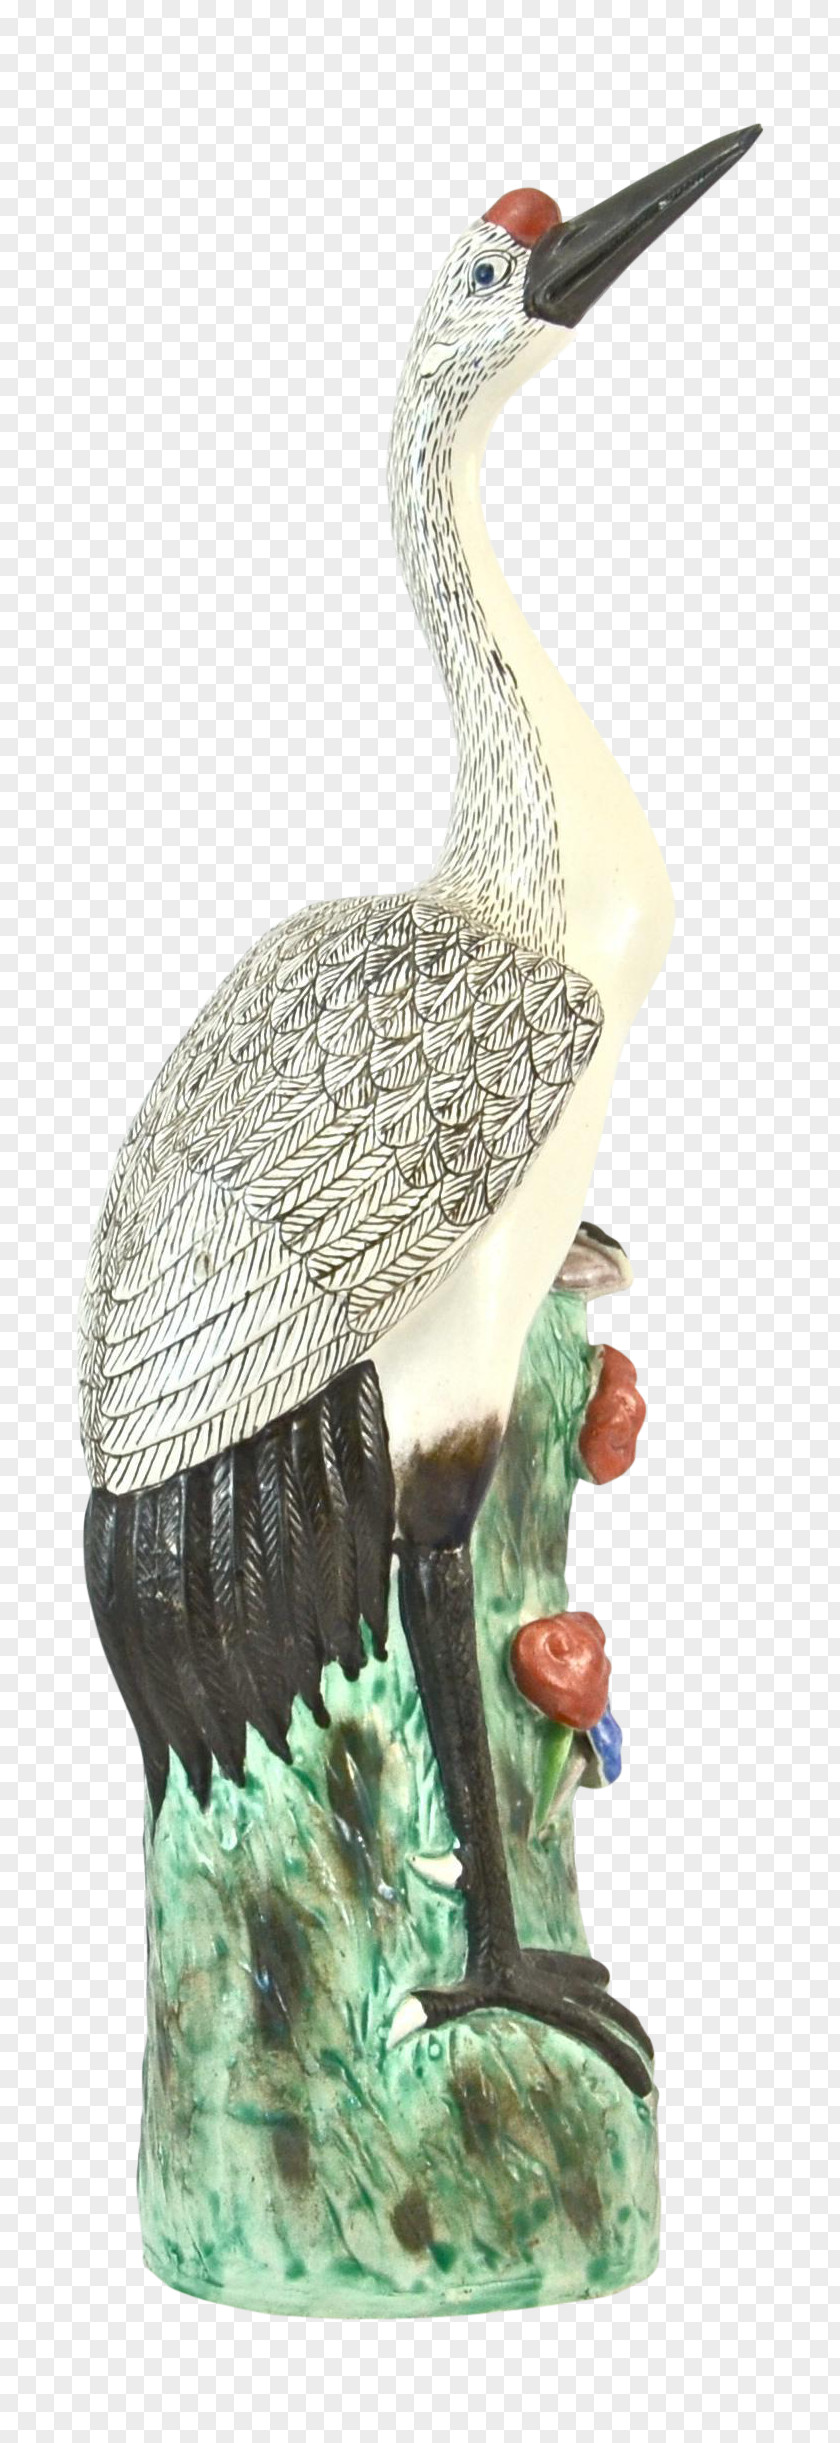 Crane Statue In Chinese Mythology Sculpture Figurine PNG